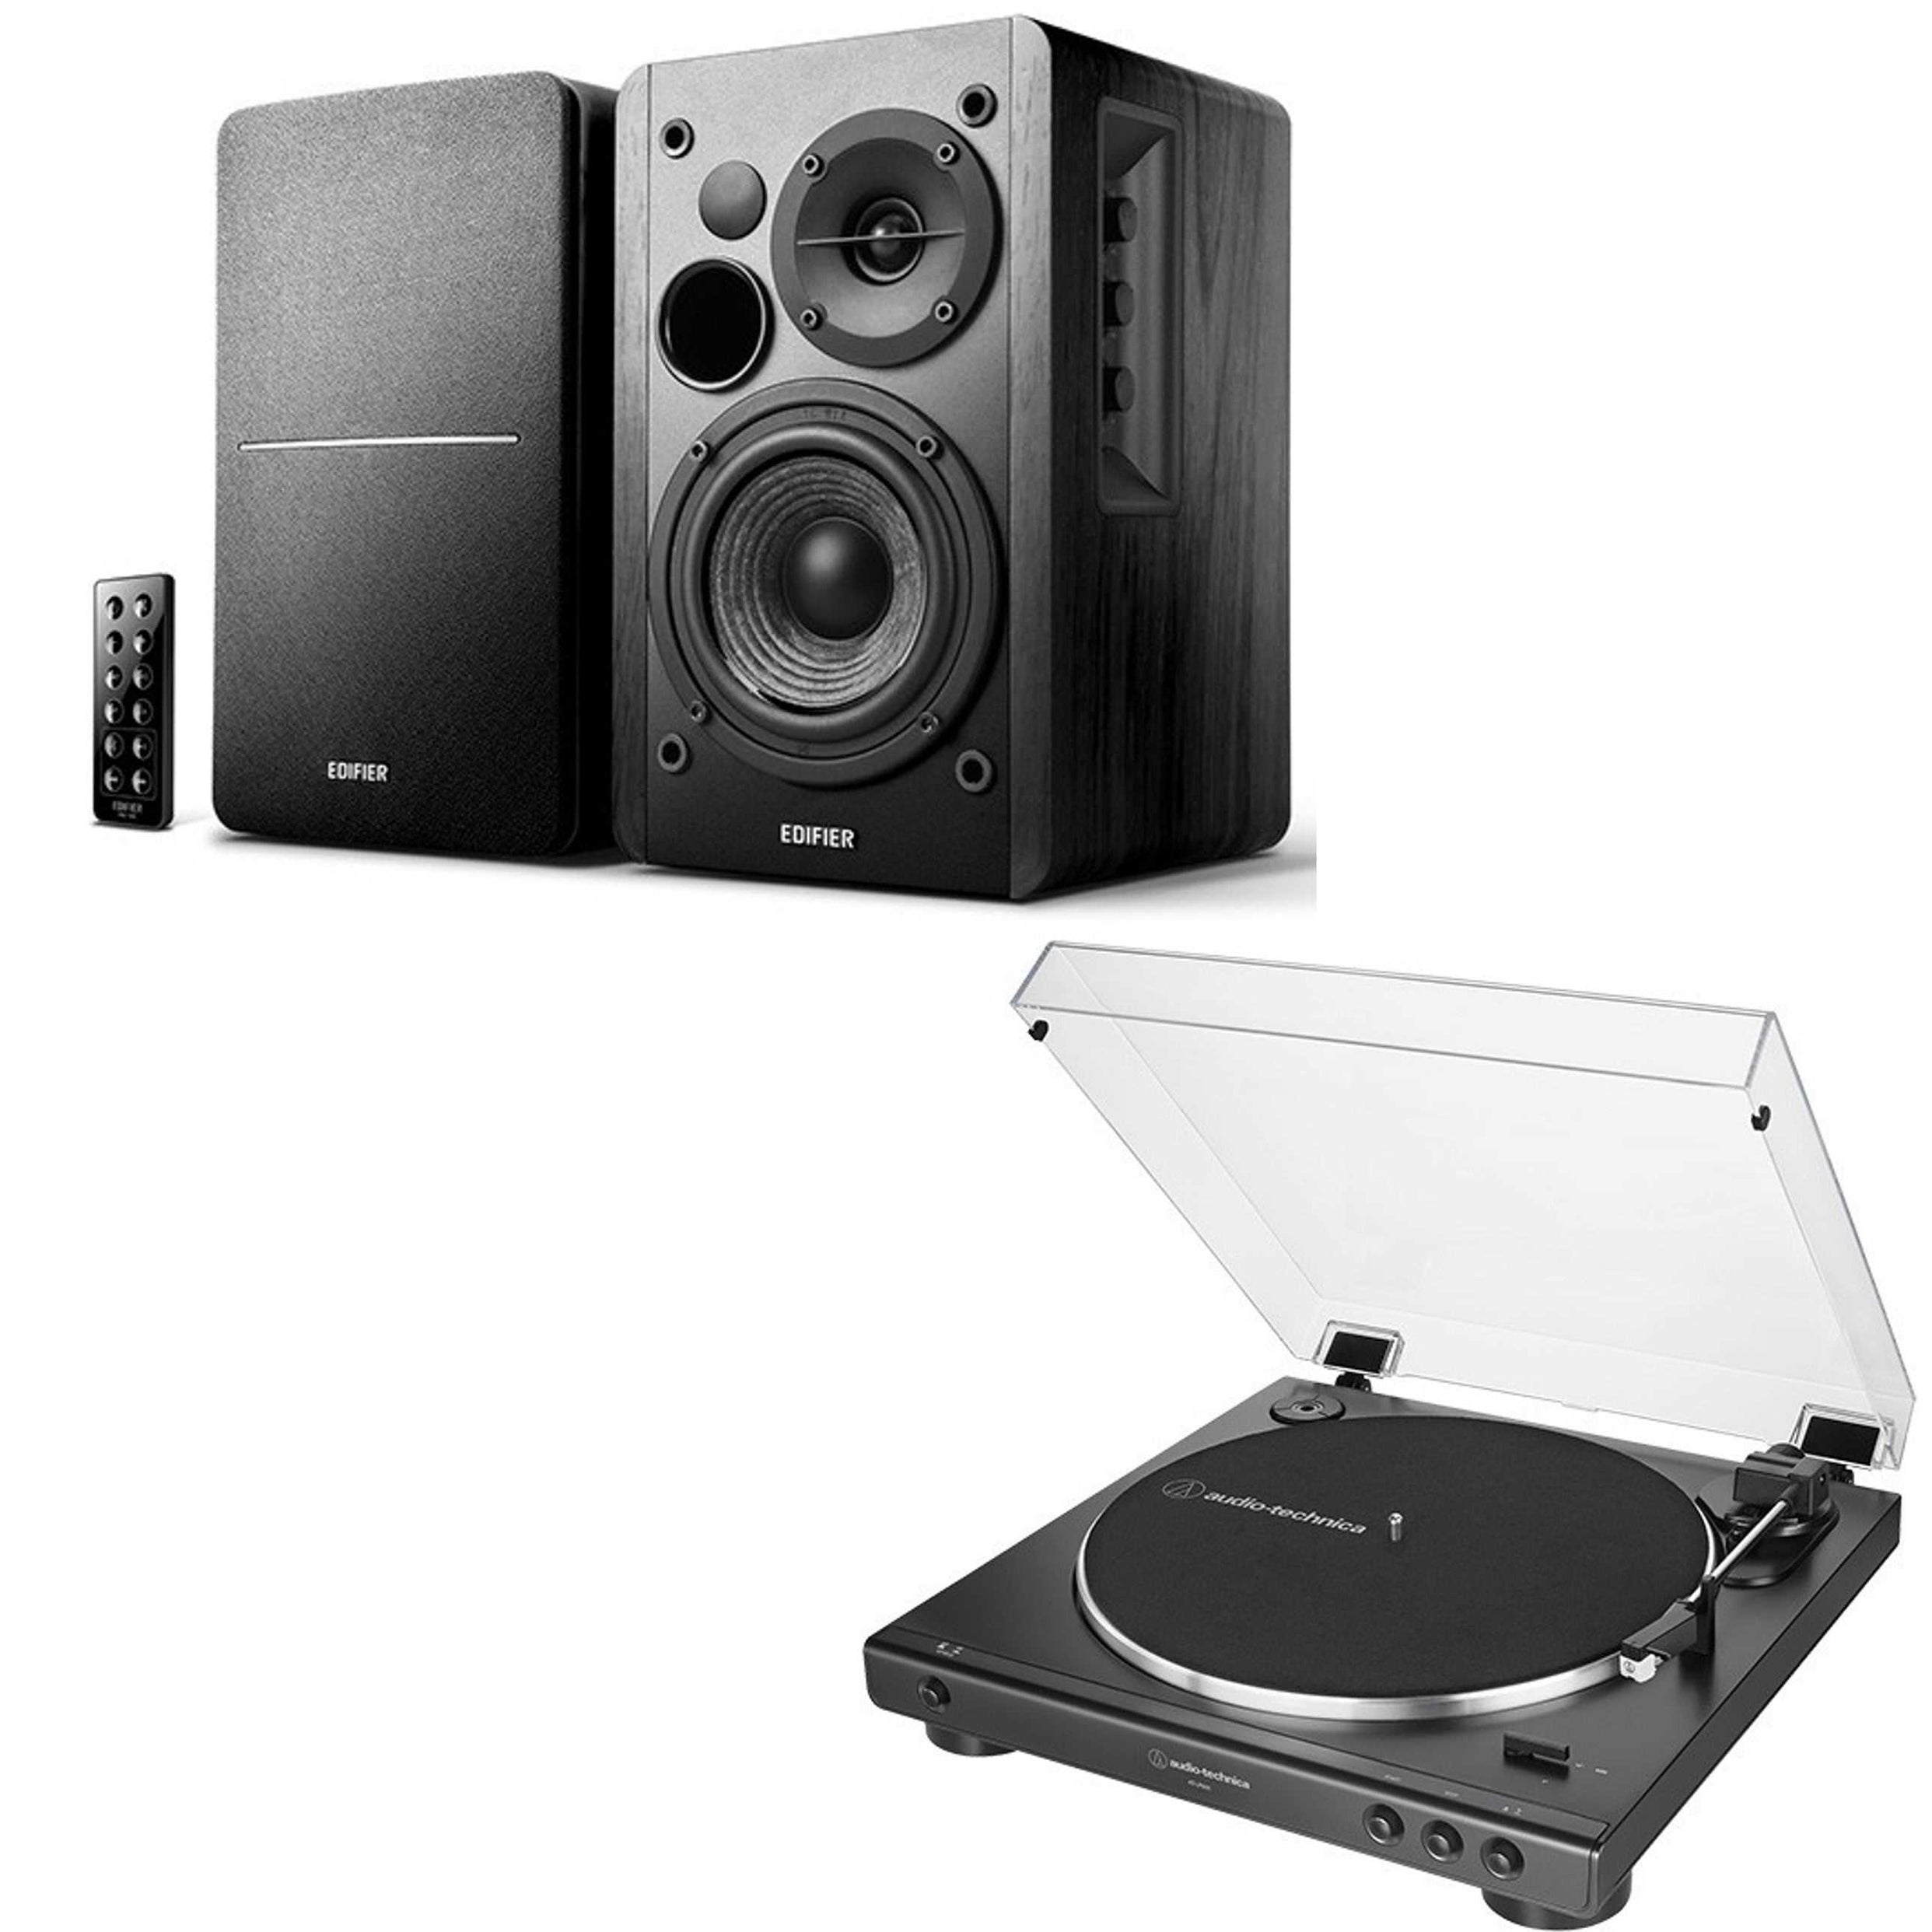 Audio-Technica AT-LP60XBT Turntable Black and Edifier R1280DB's (Sub-Out) Black Bluetooth Bundle